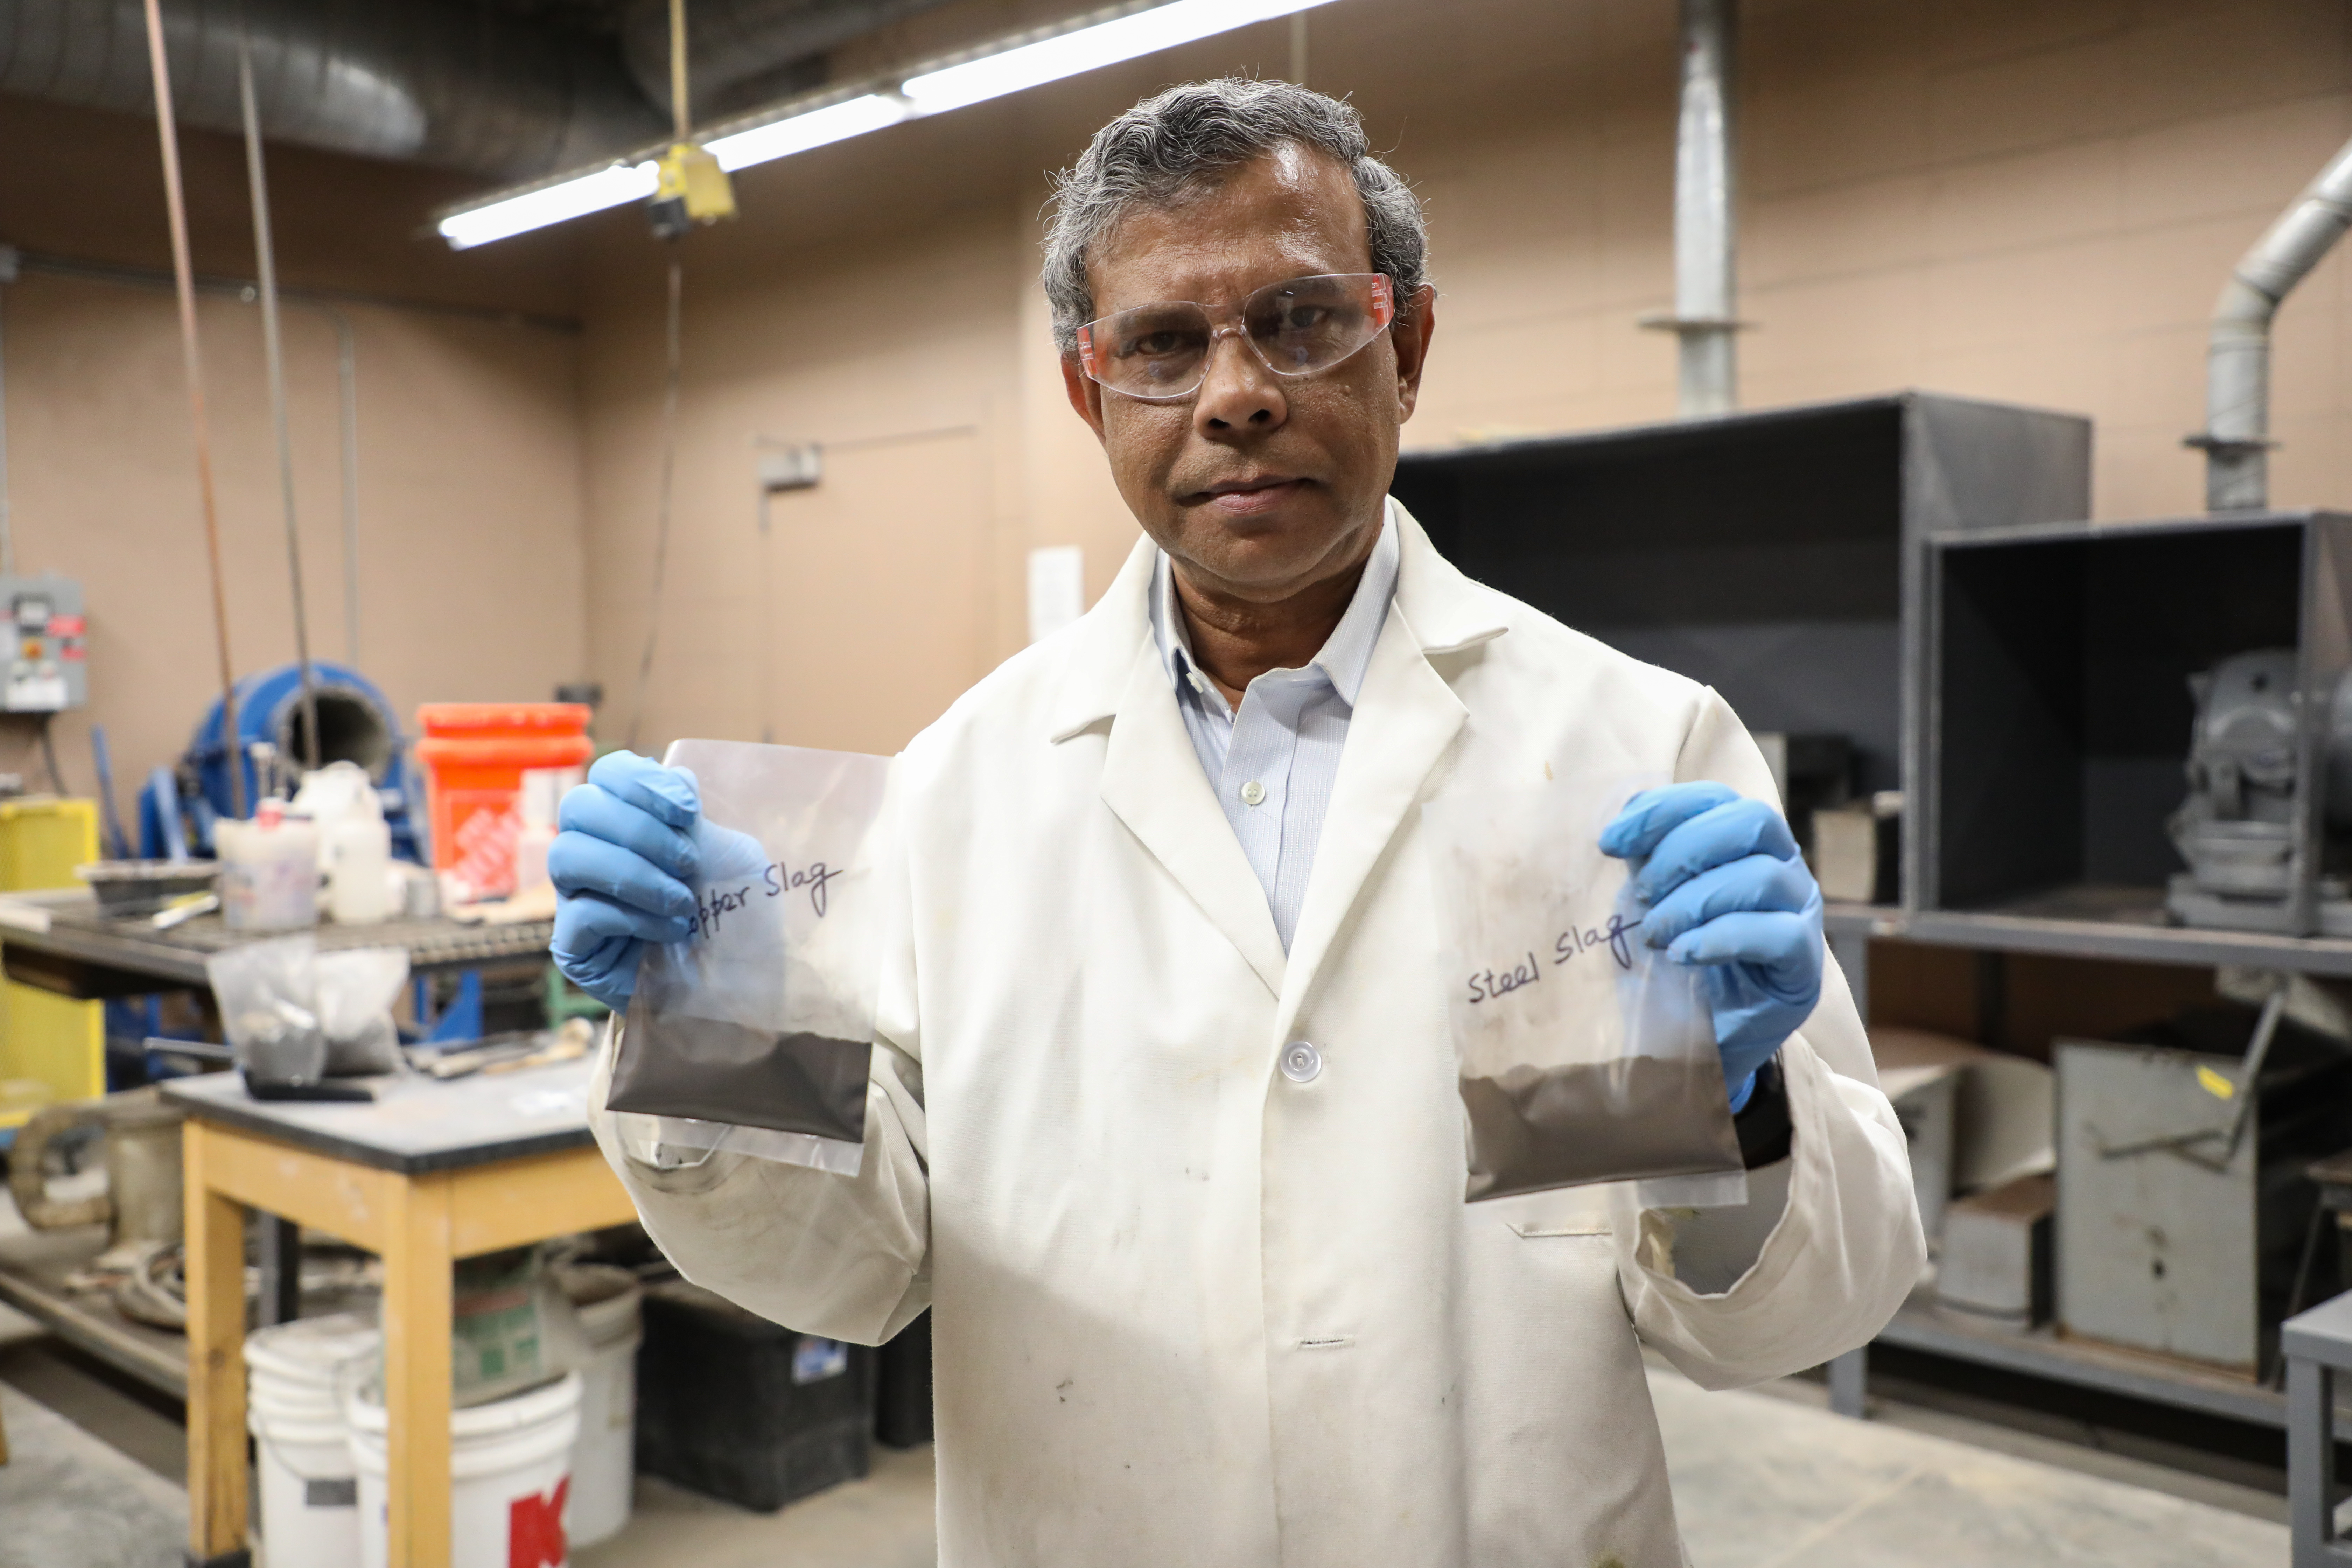 Professor Das holds two see-through baggies, one marked "copper slag" the other marked "steel slag."